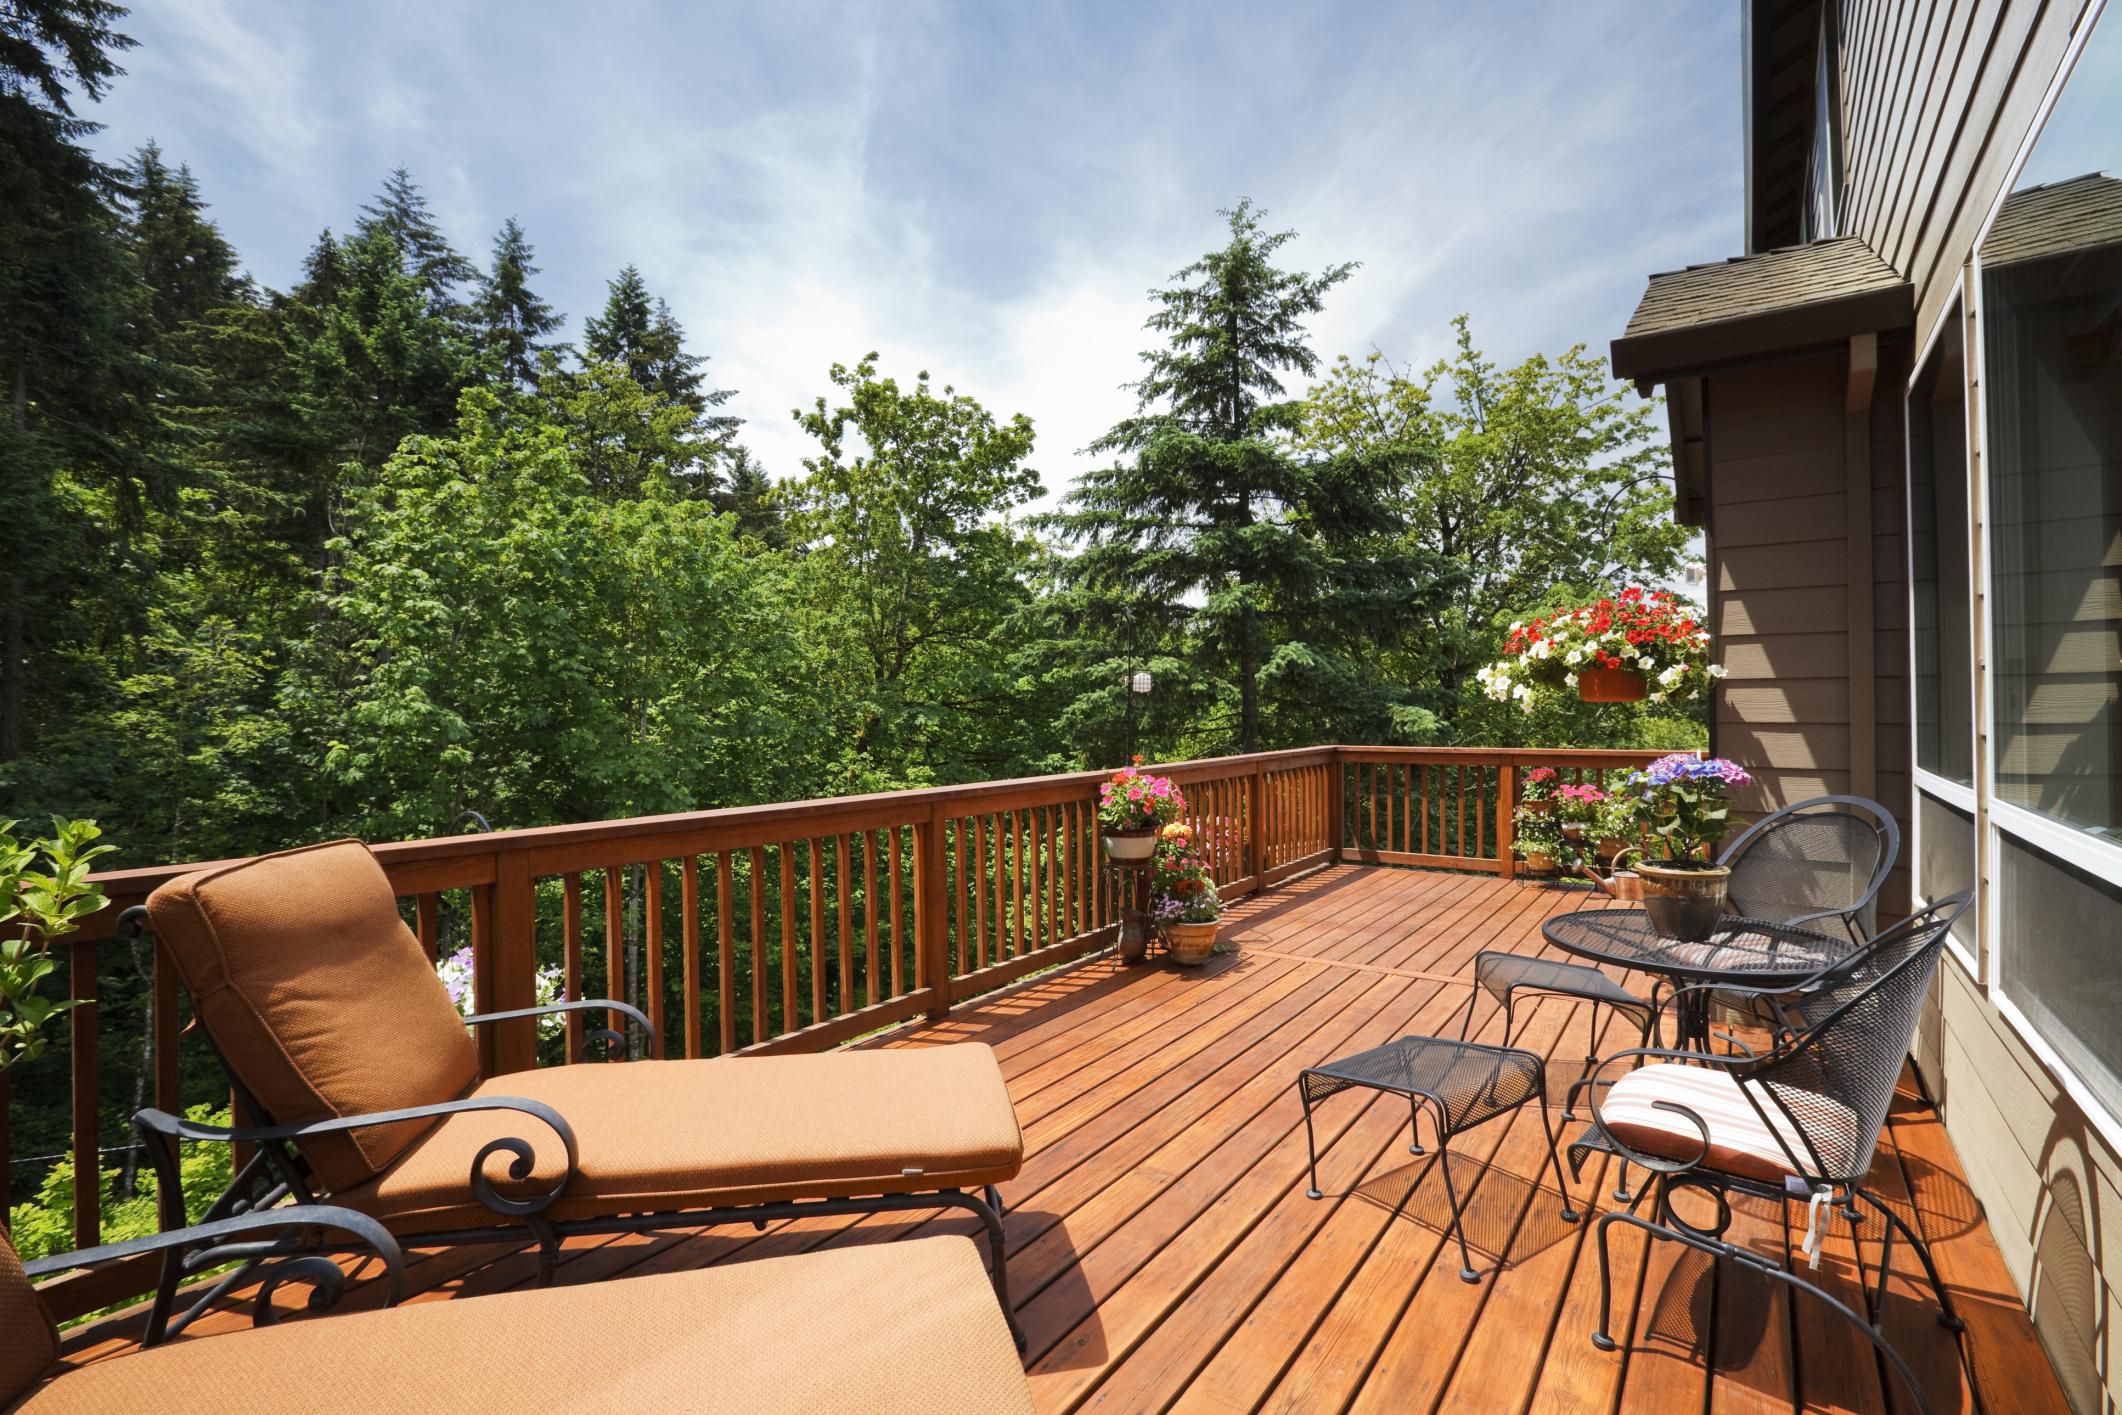 Building Code Guidelines: Decking Railing Heights, Guards, and Stairs